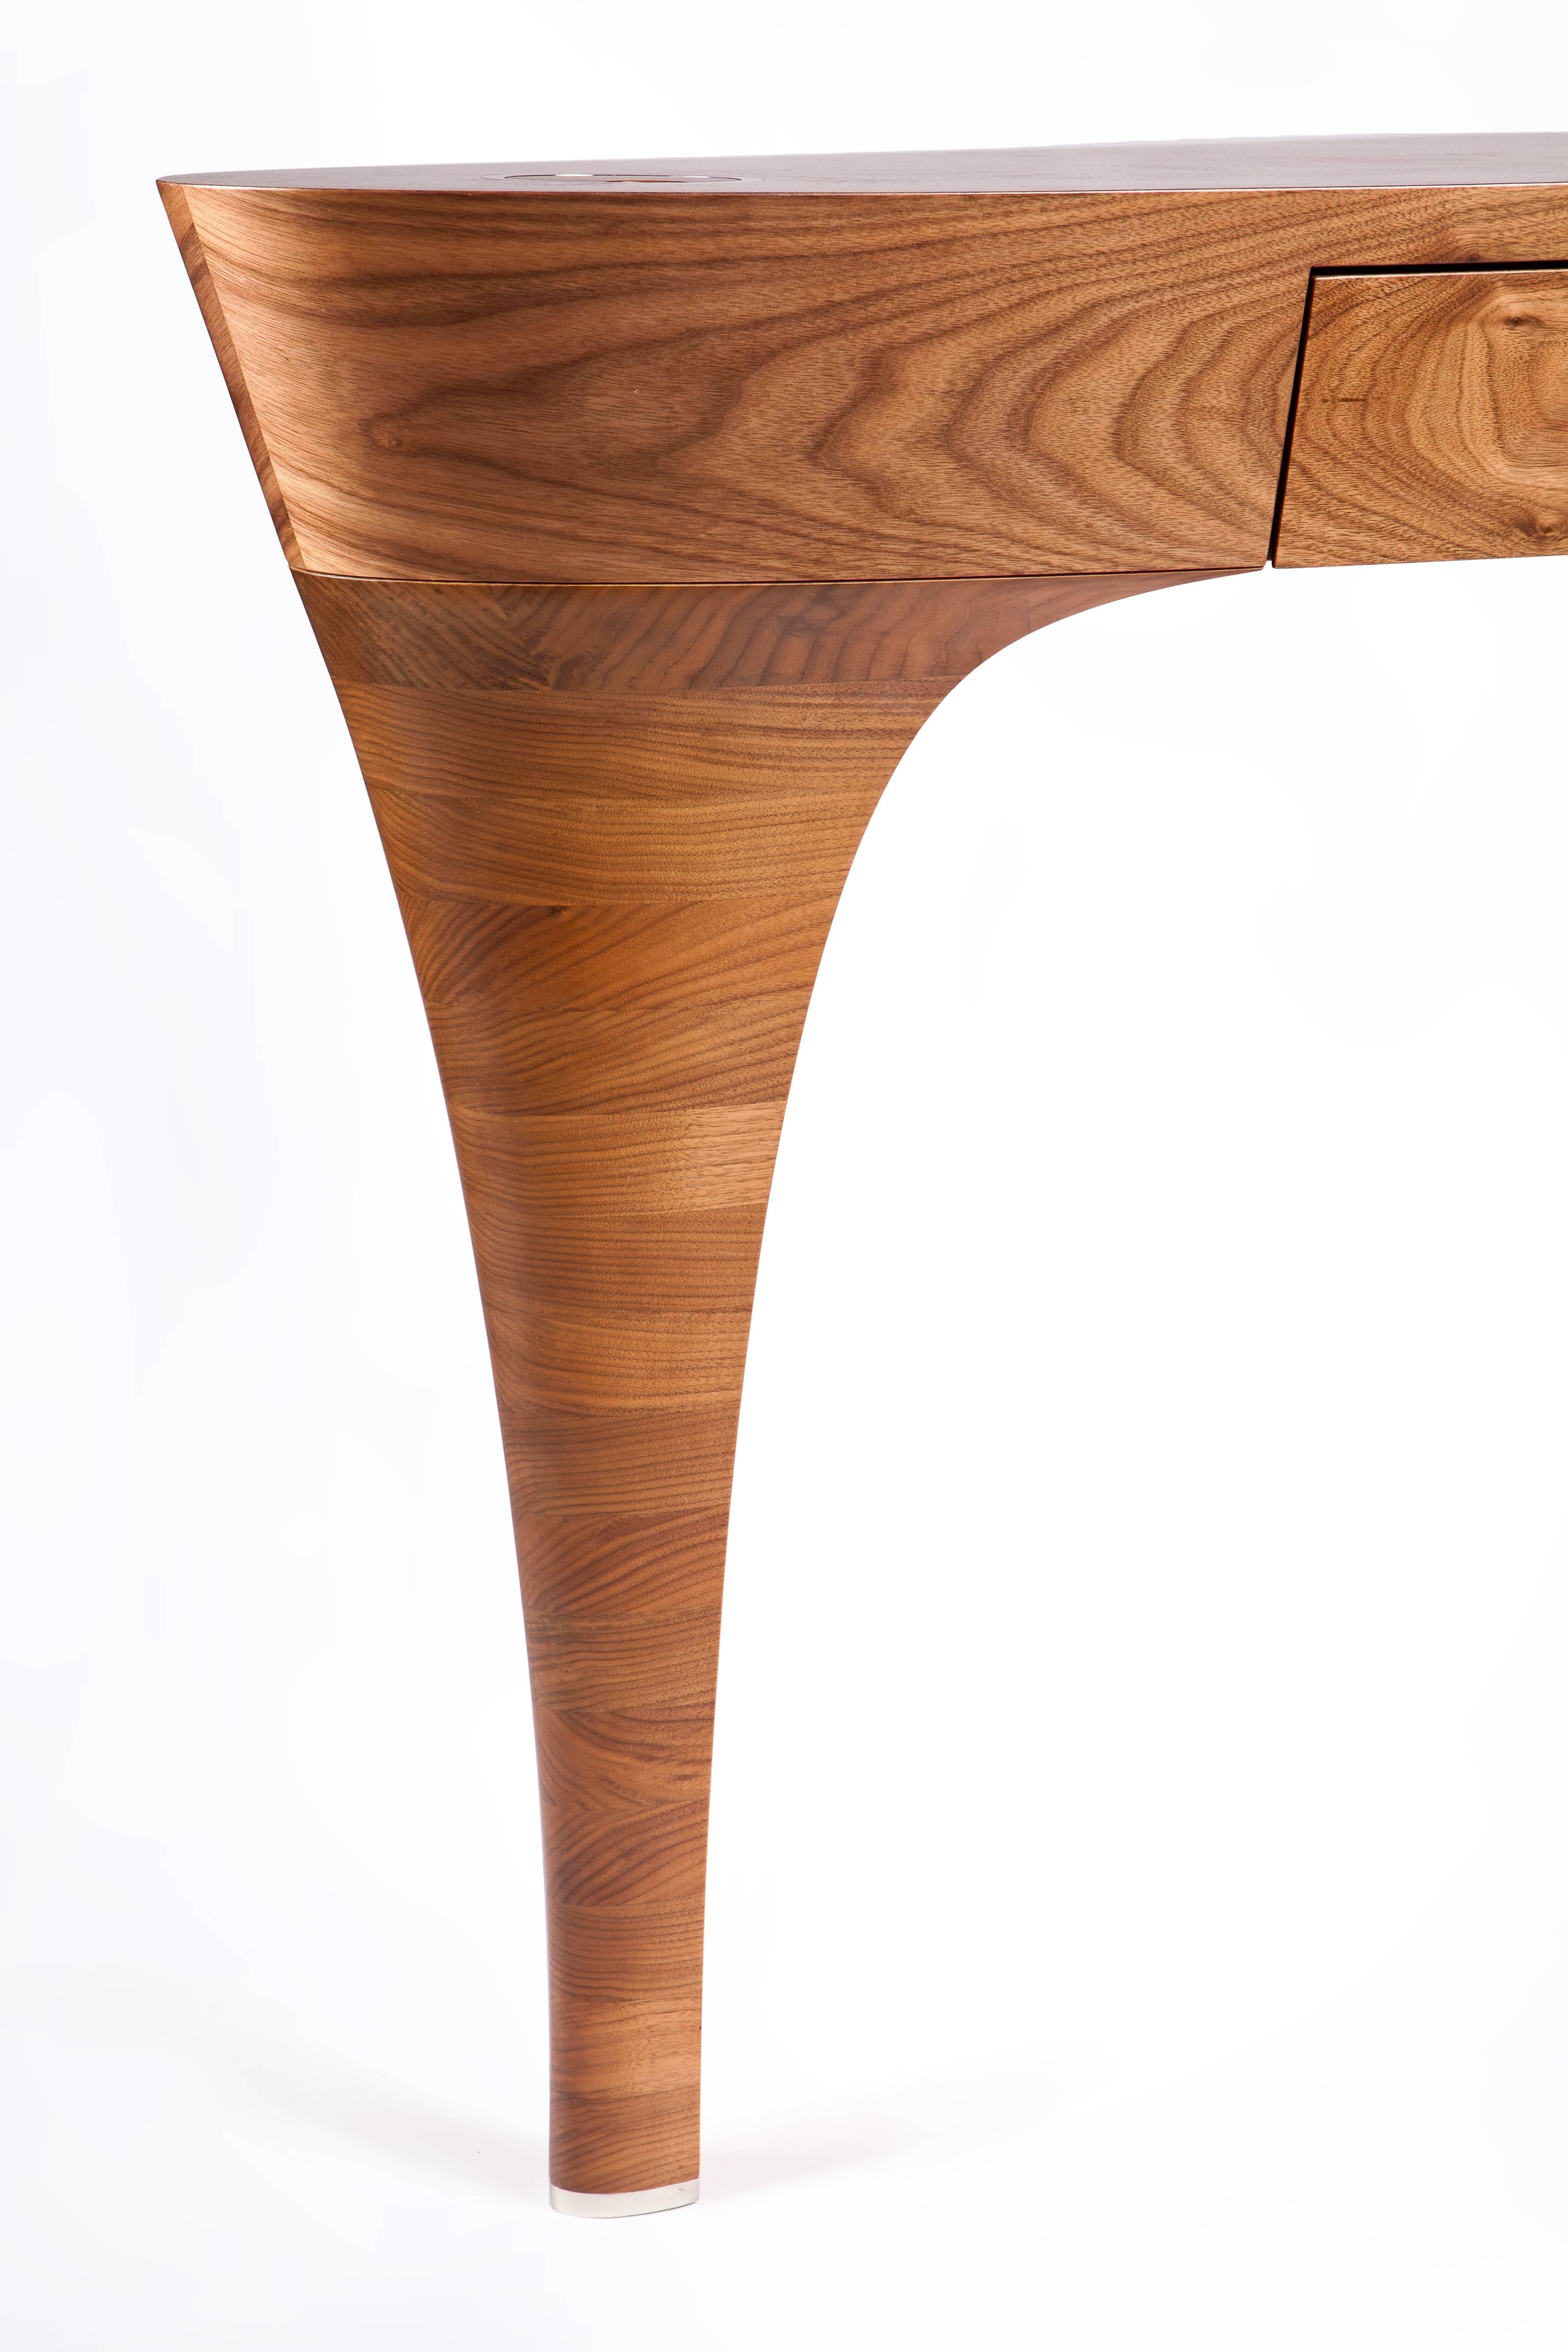 Stiletto by Splinter Works.
French burr walnut, stained Bird’s-eye maple.

Stiletto can function as a desk, console table or dressing table. The curvaceous leg of the table evokes a stacked heel stiletto and is hand-sculpted from solid walnut.